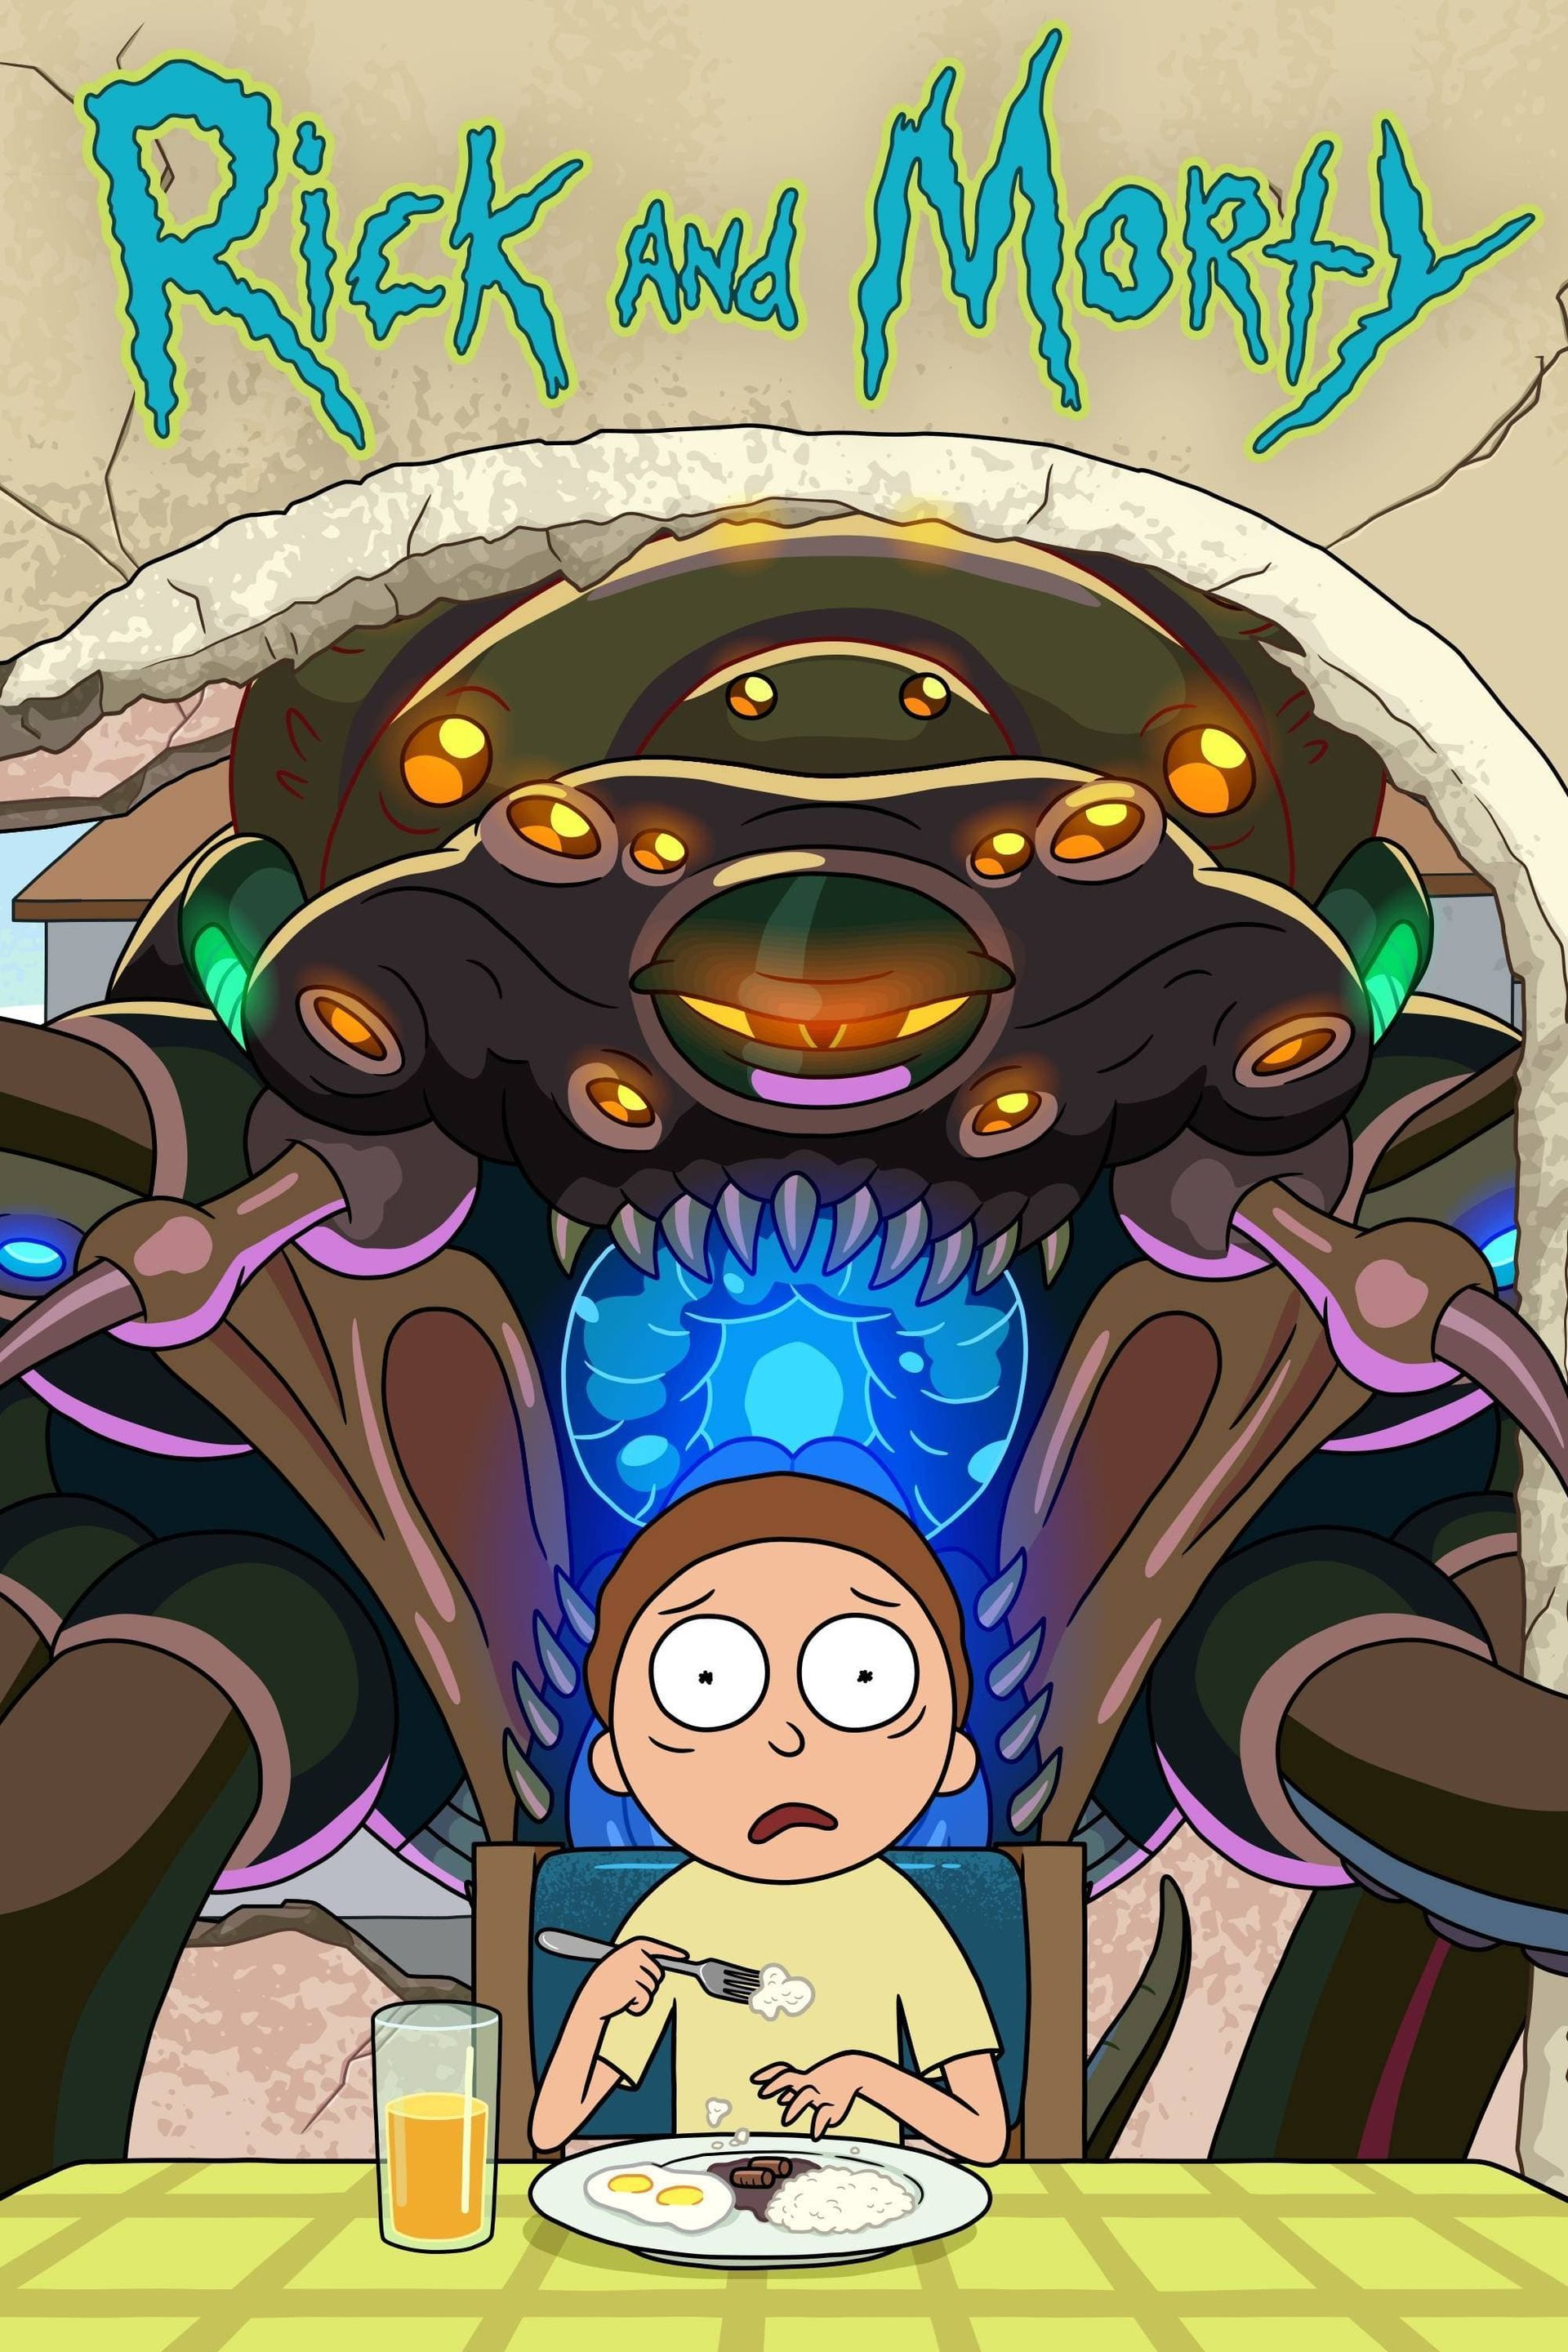 Watch Rick and Morty (2013) TV Series Free Online - Plex